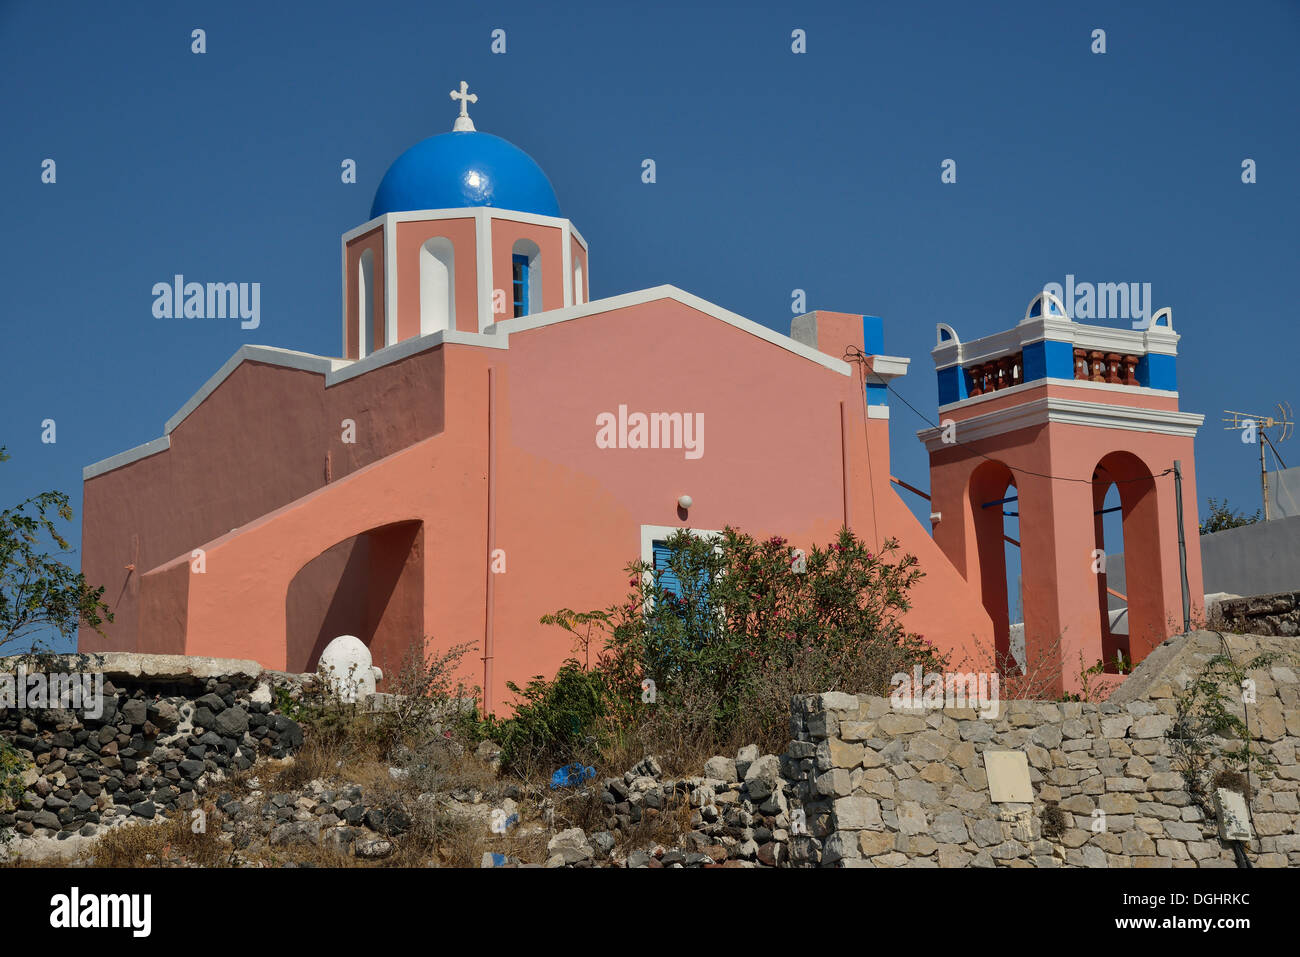 Church with a blue dome, typical Cycladic architecture, Oía, Santorini, Cyclades, Greek Islands, Greece, Europe Stock Photo